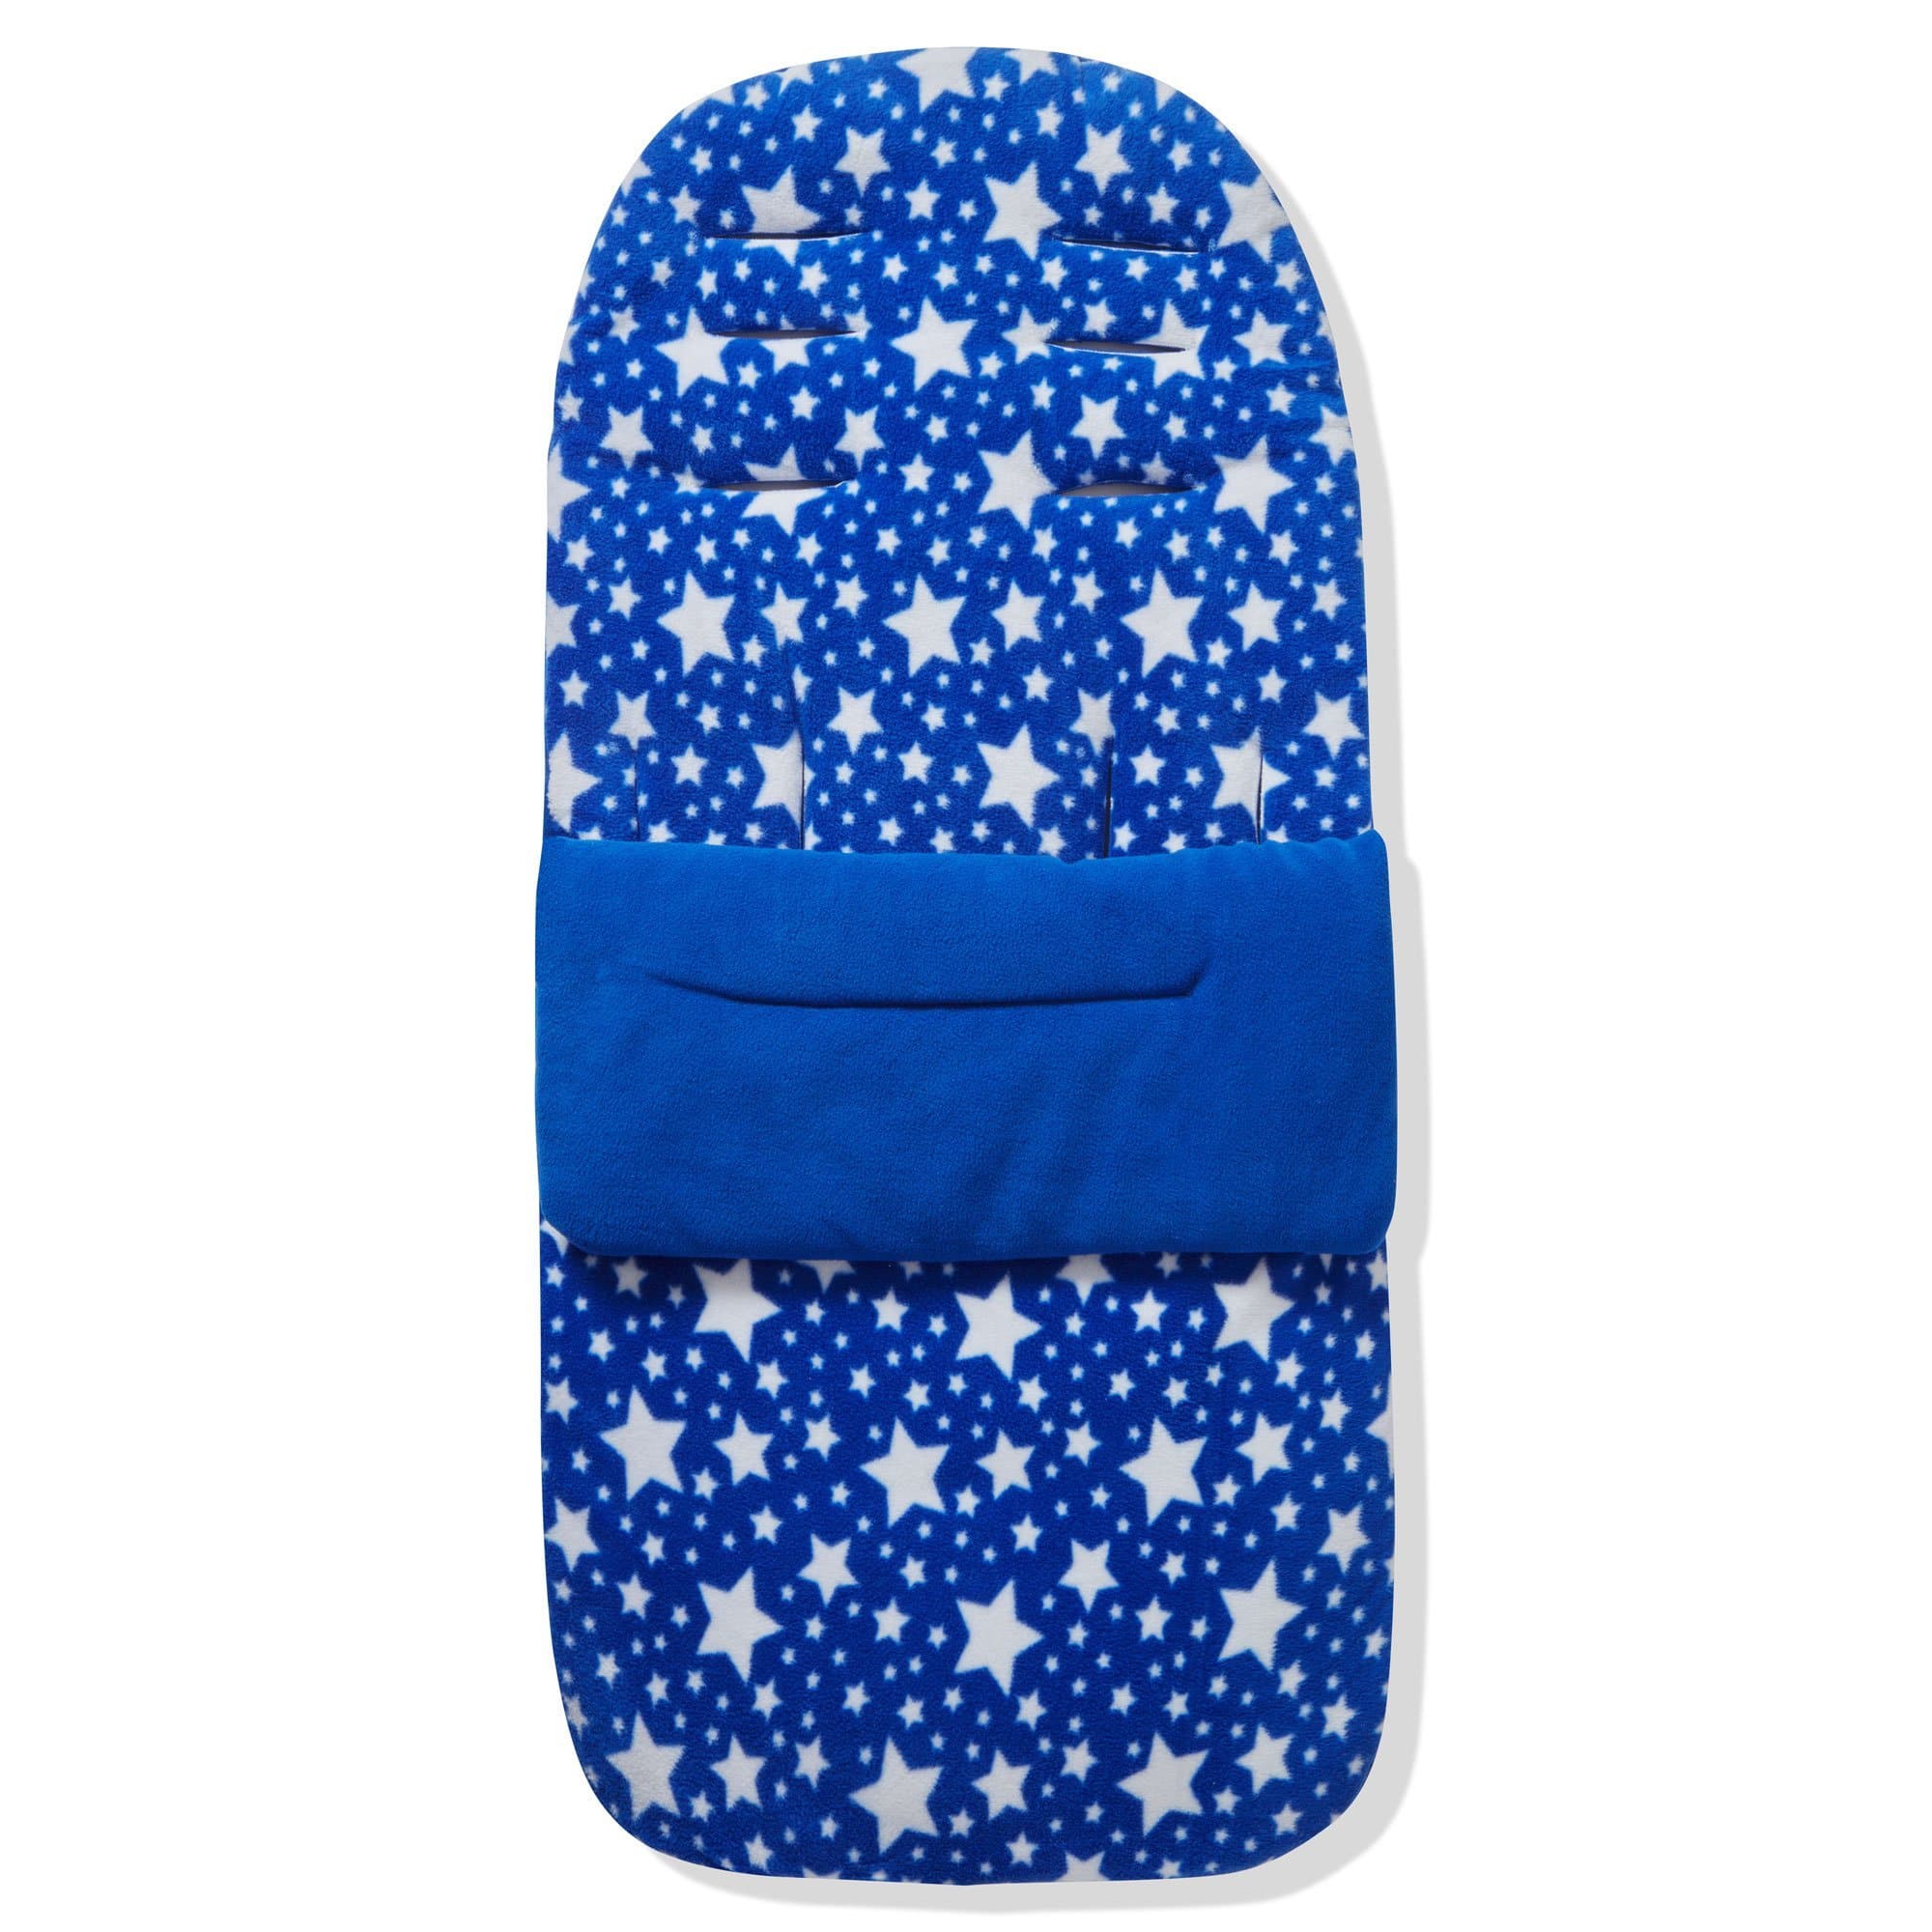 Fleece Footmuff / Cosy Toes Compatible with Gesslein - Blue Star / Fits All Models | For Your Little One